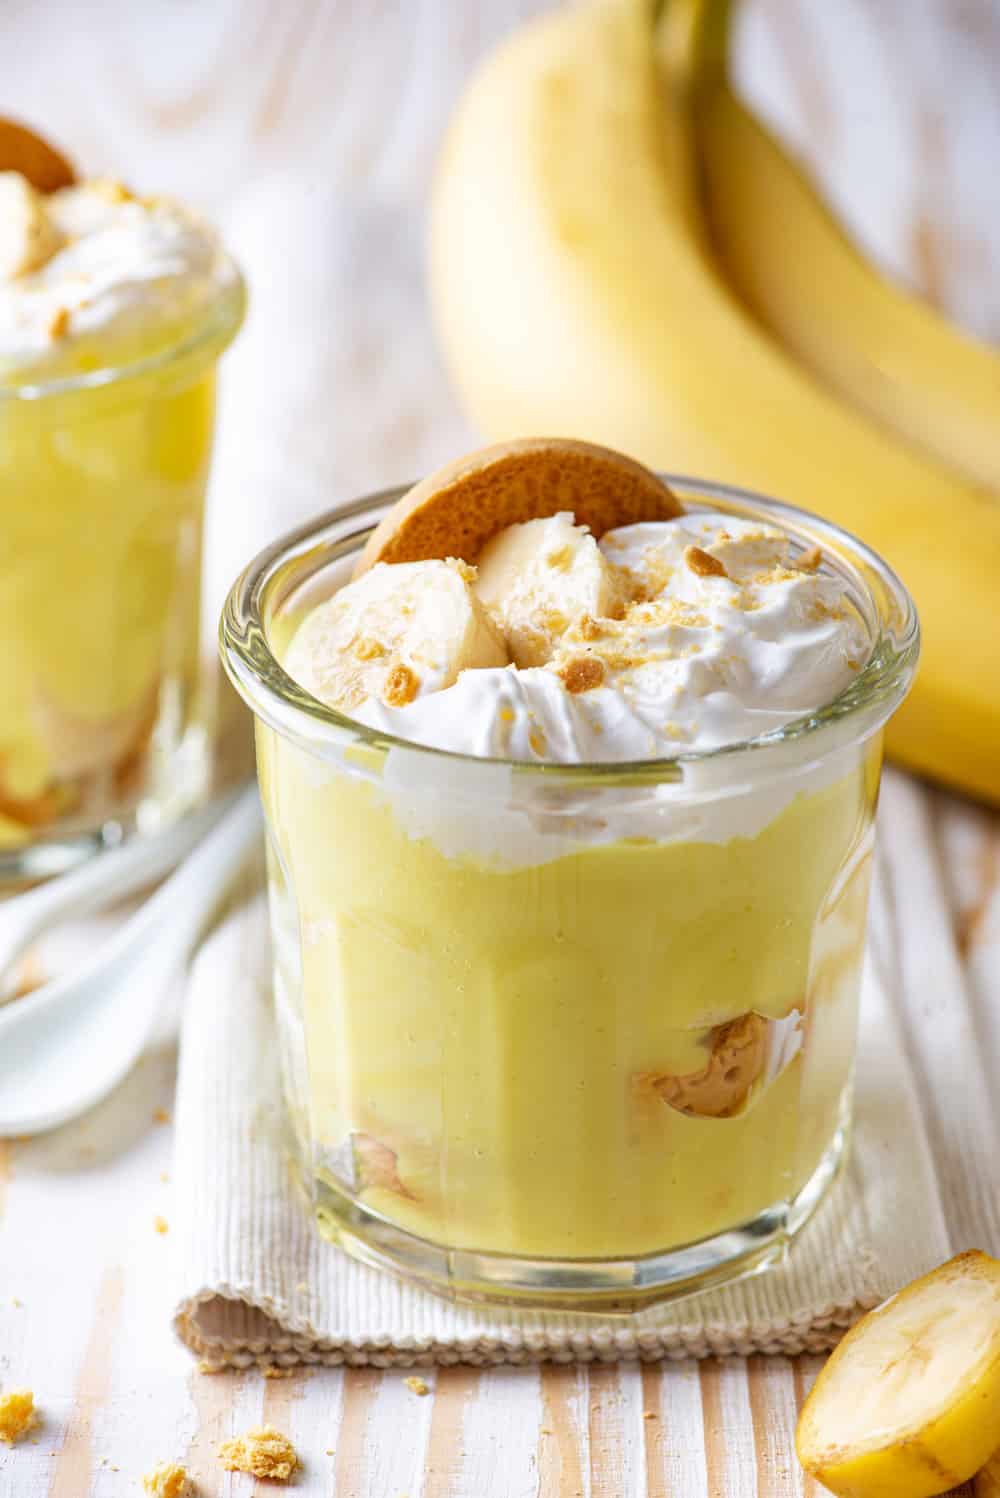 A glass cup filled with vegan banana pudding with vegan whipped cream, slices of bananas, and a vanilla cookie on top. Two bananas are behind the glass cup and the cup is on a cloth on a wooden table.